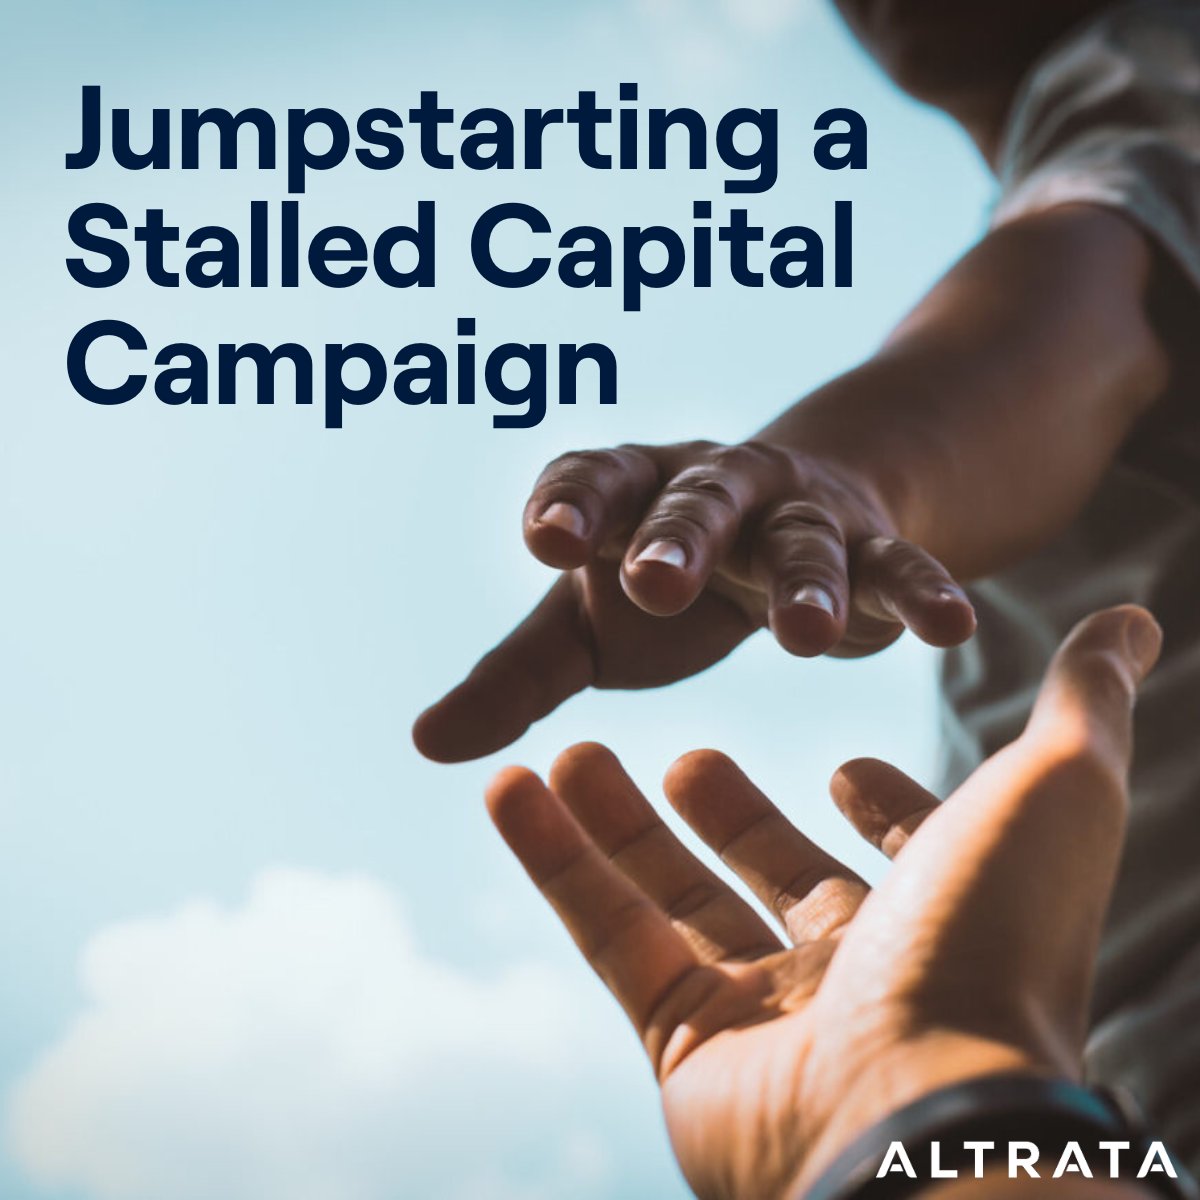 Stuck with a stalled capital campaign? We compiled some of the most effective methods to jumpstart your campaign, helping your organization make a bigger impact during fundraising efforts - bit.ly/3vseWja